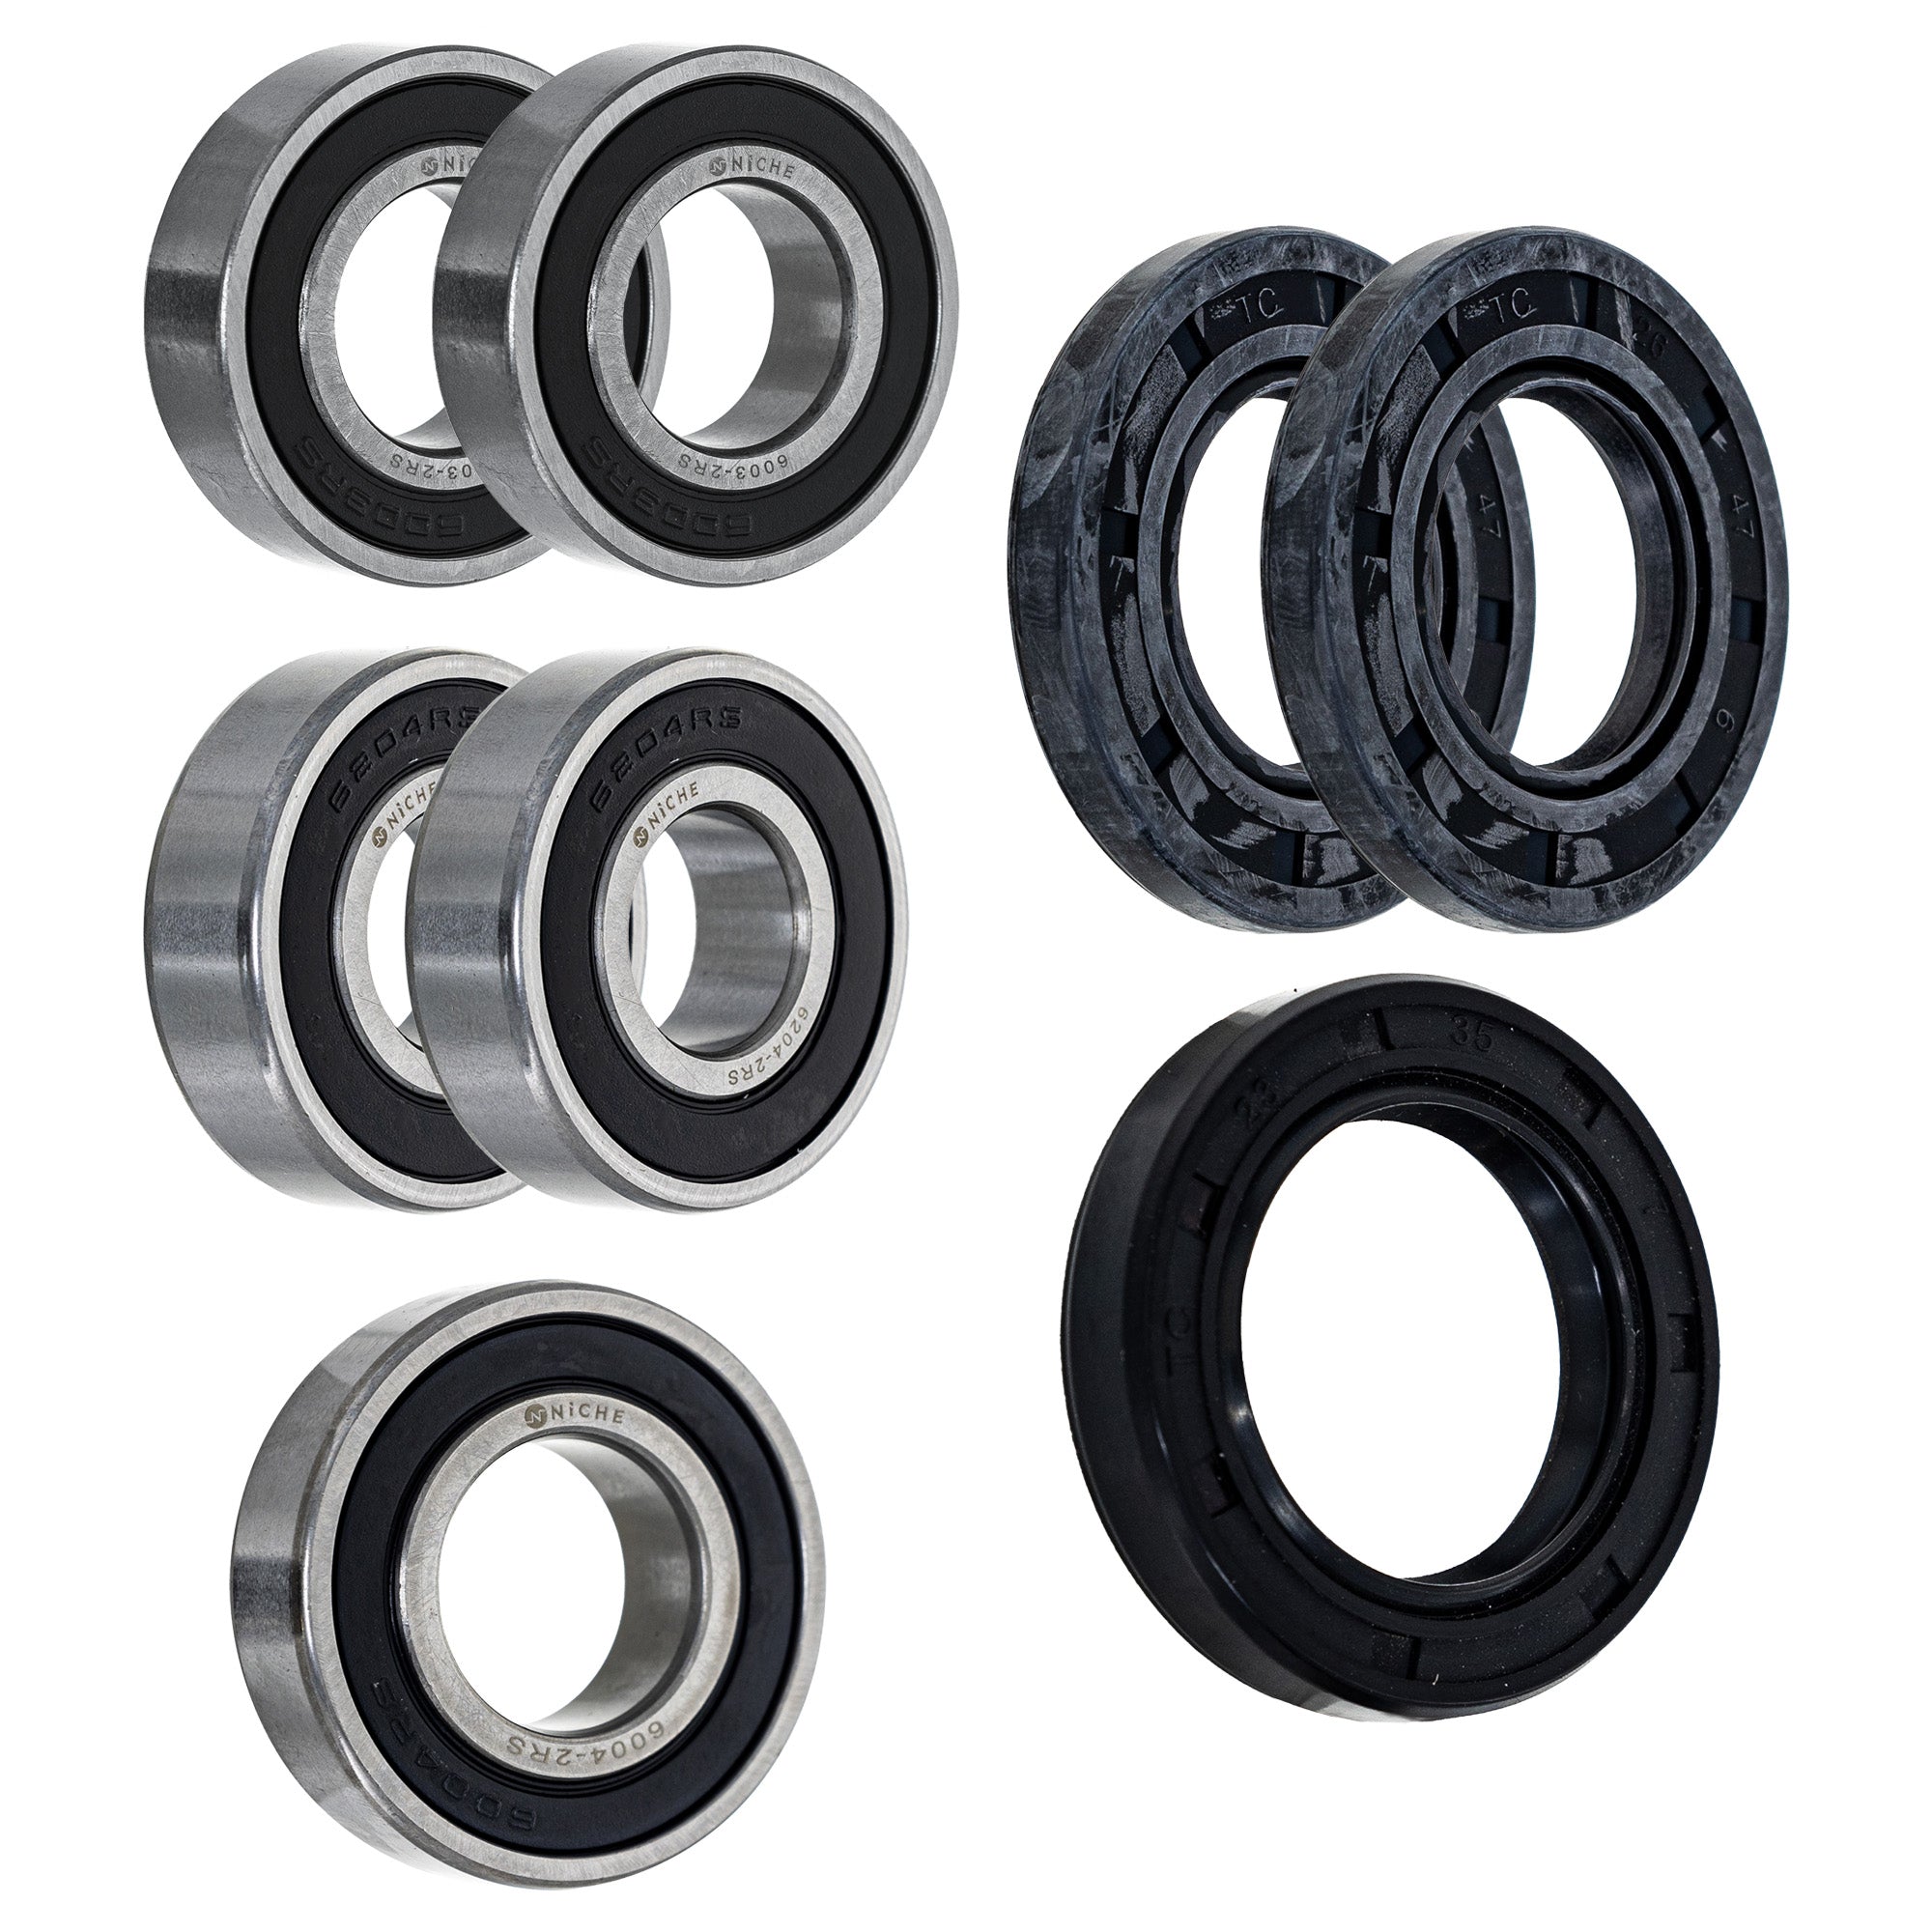 Wheel Bearing Seal Kit for zOTHER Ref No RMX250 NICHE MK1008751